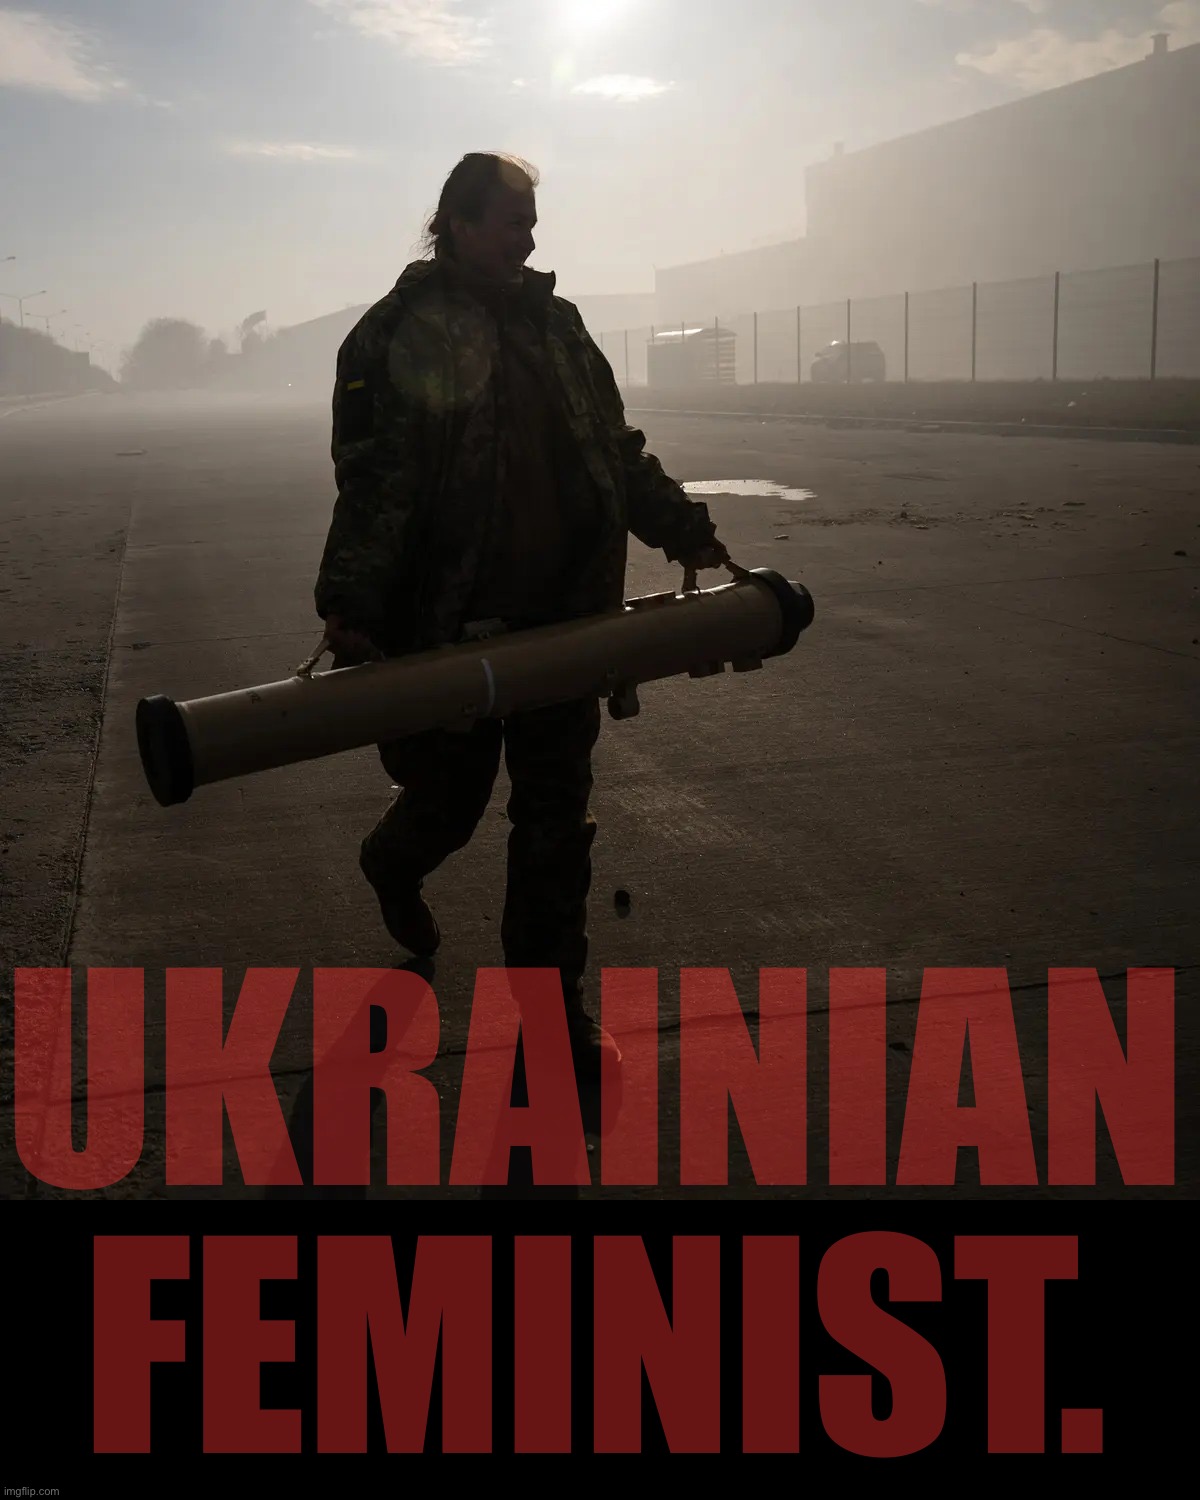 Lt. Tetiana Chornoval, commander of an anti-tank missile unit, on the outskirts of Kiev; early-March 2022. | UKRAINIAN FEMINIST. | image tagged in ukrainian soldier,ukraine,ukrainian lives matter,ukrainian,feminism,feminist | made w/ Imgflip meme maker